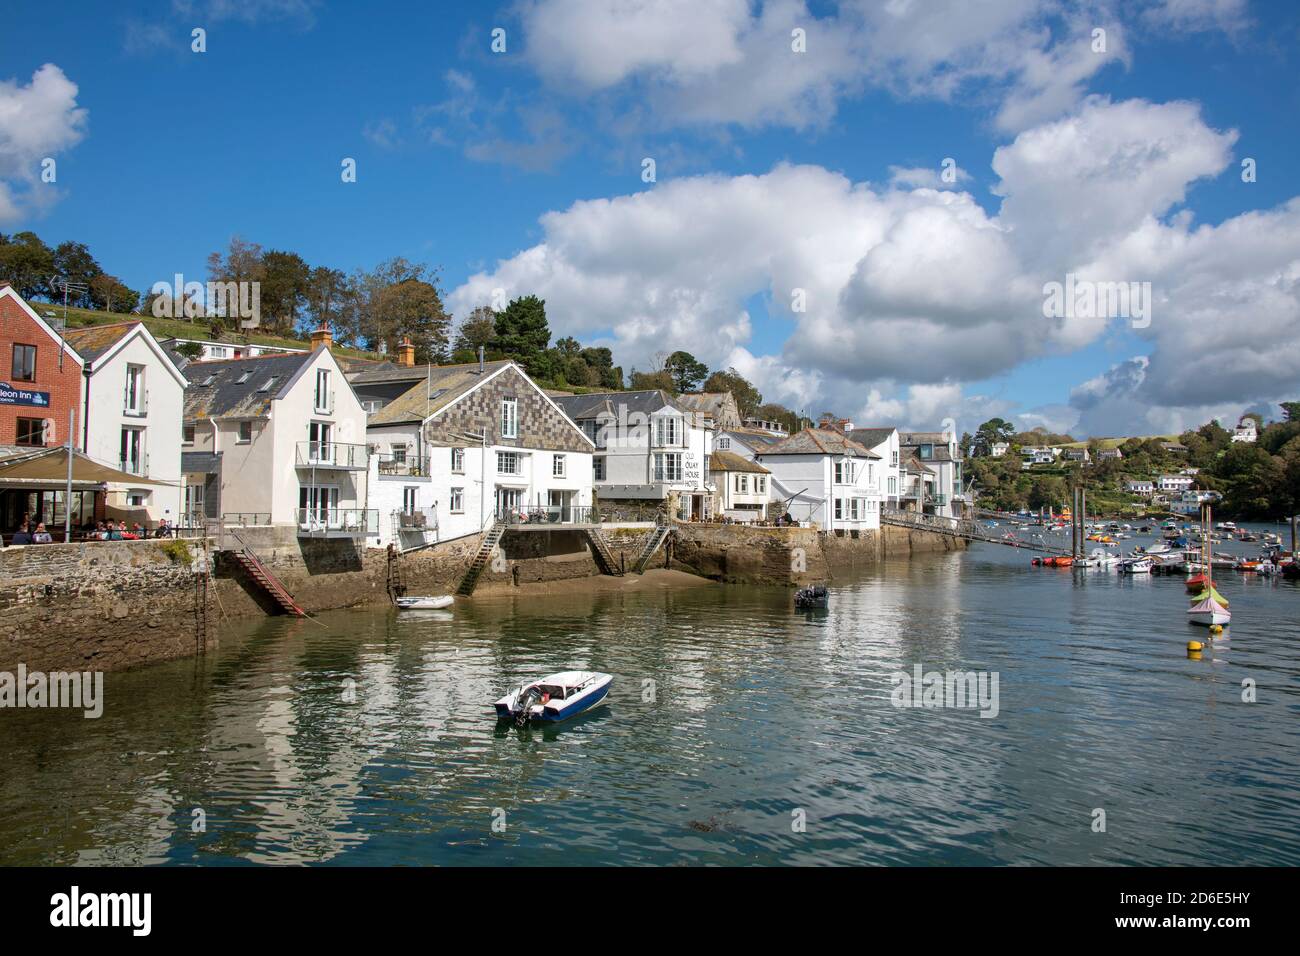 Picturesque view riverside buildings Fowey Cornwall England Stock Photo